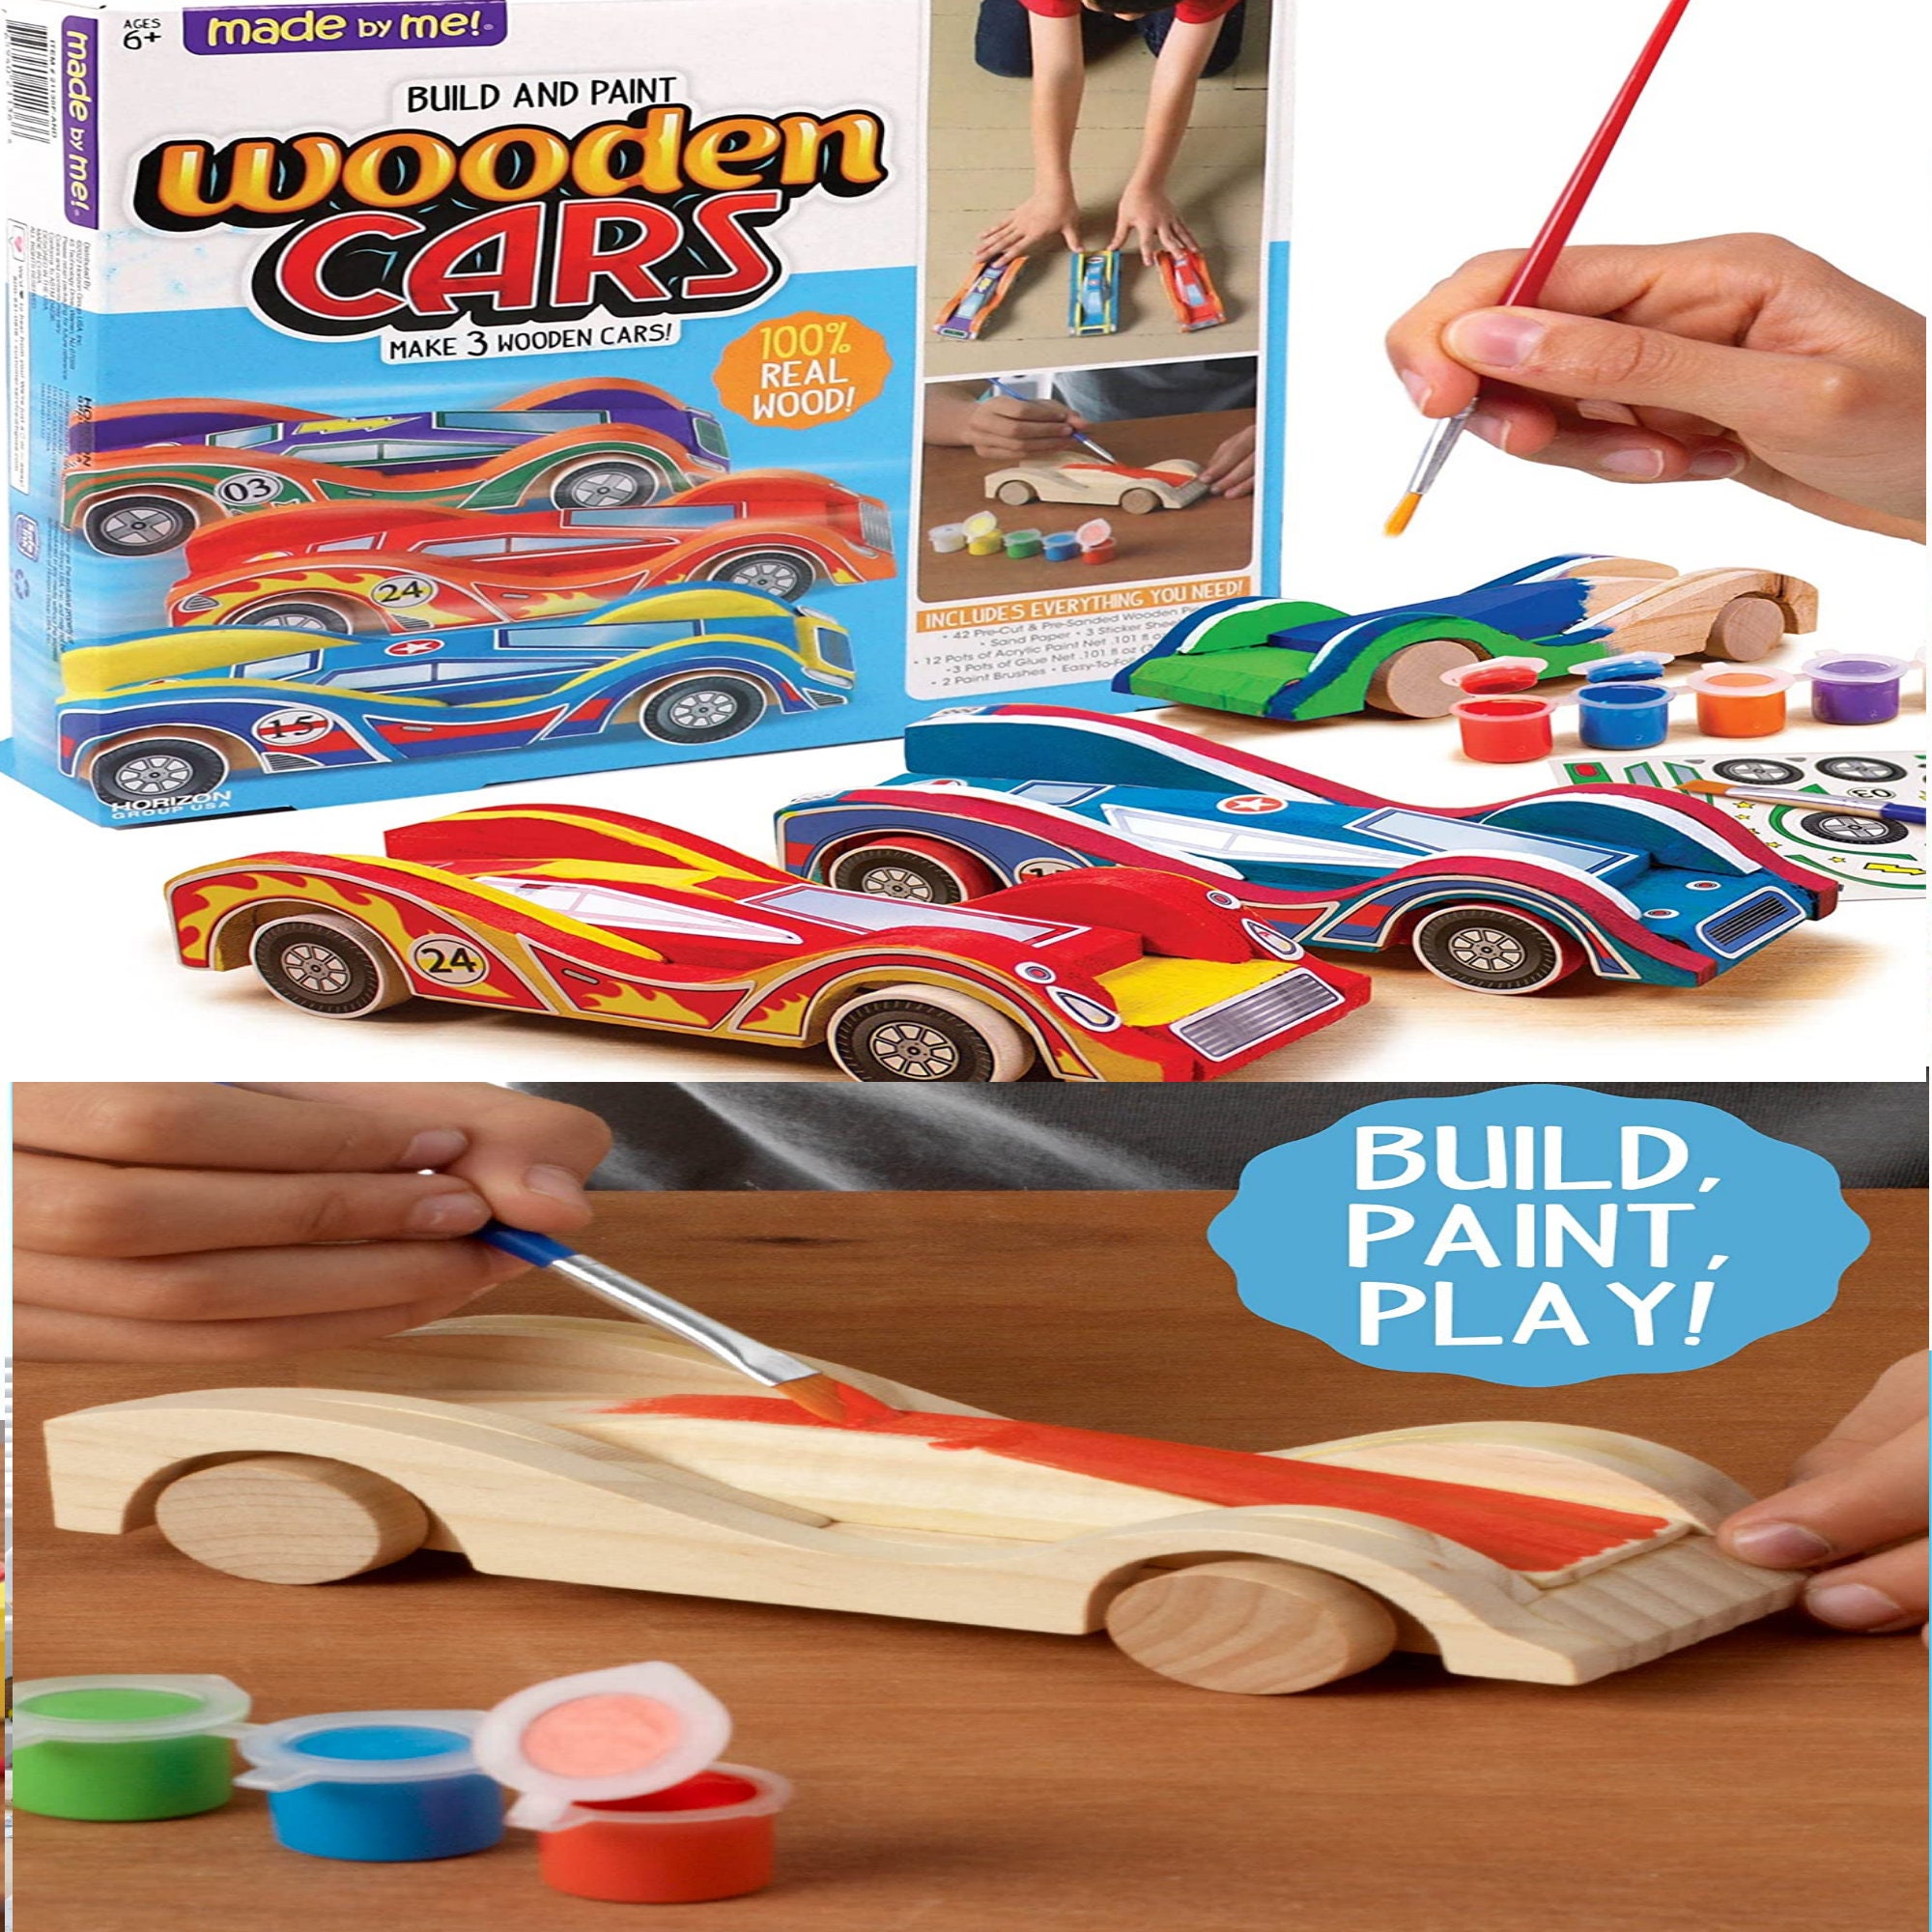 7july Wooden Arts and Crafts Kits for Kids Kids Boys Girls Age 6-12 Years Old,Wood Slices with Gem Diamond Painting Sets-Little Children's Art & Craft